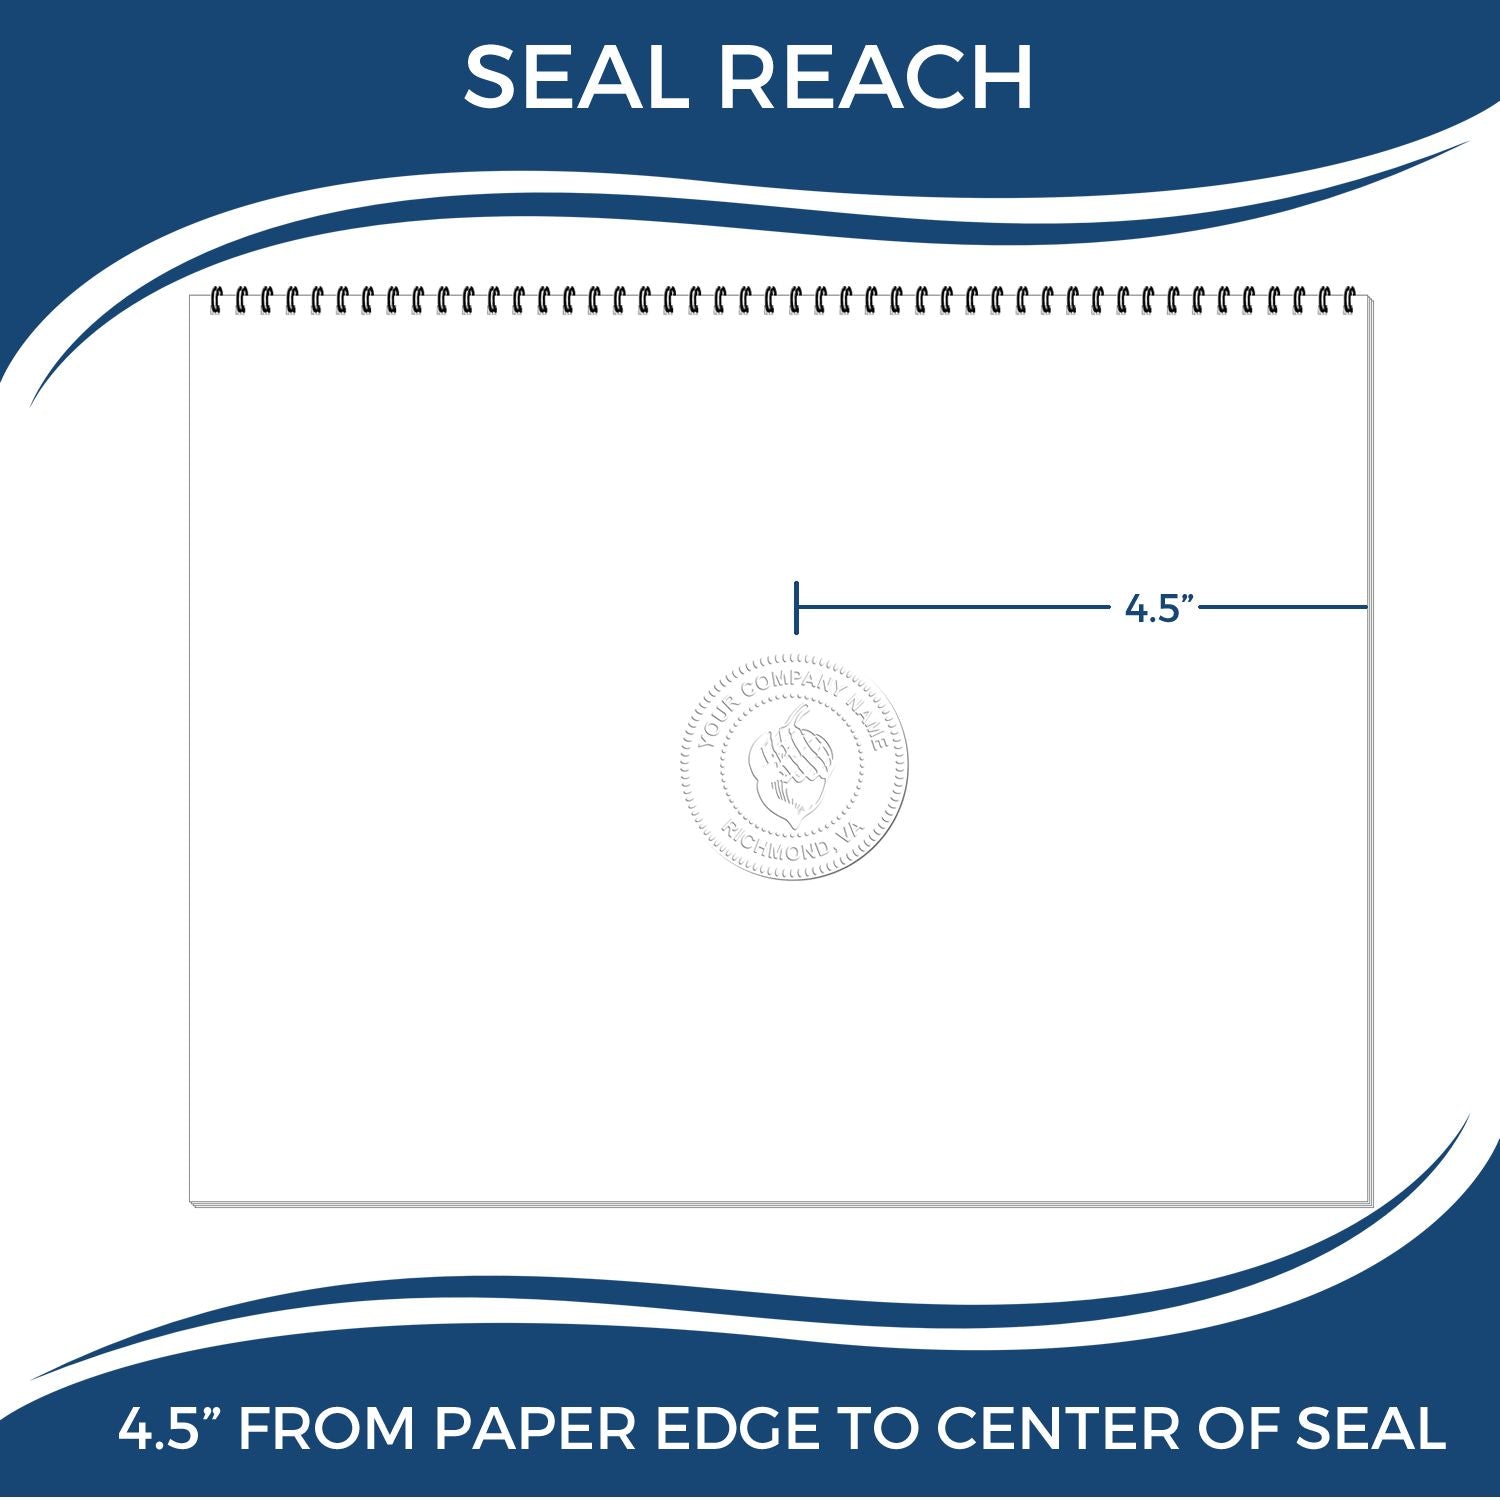 An infographic showing the seal reach which is represented by a ruler and a miniature seal image of the Extended Long Reach North Carolina Architect Seal Embosser